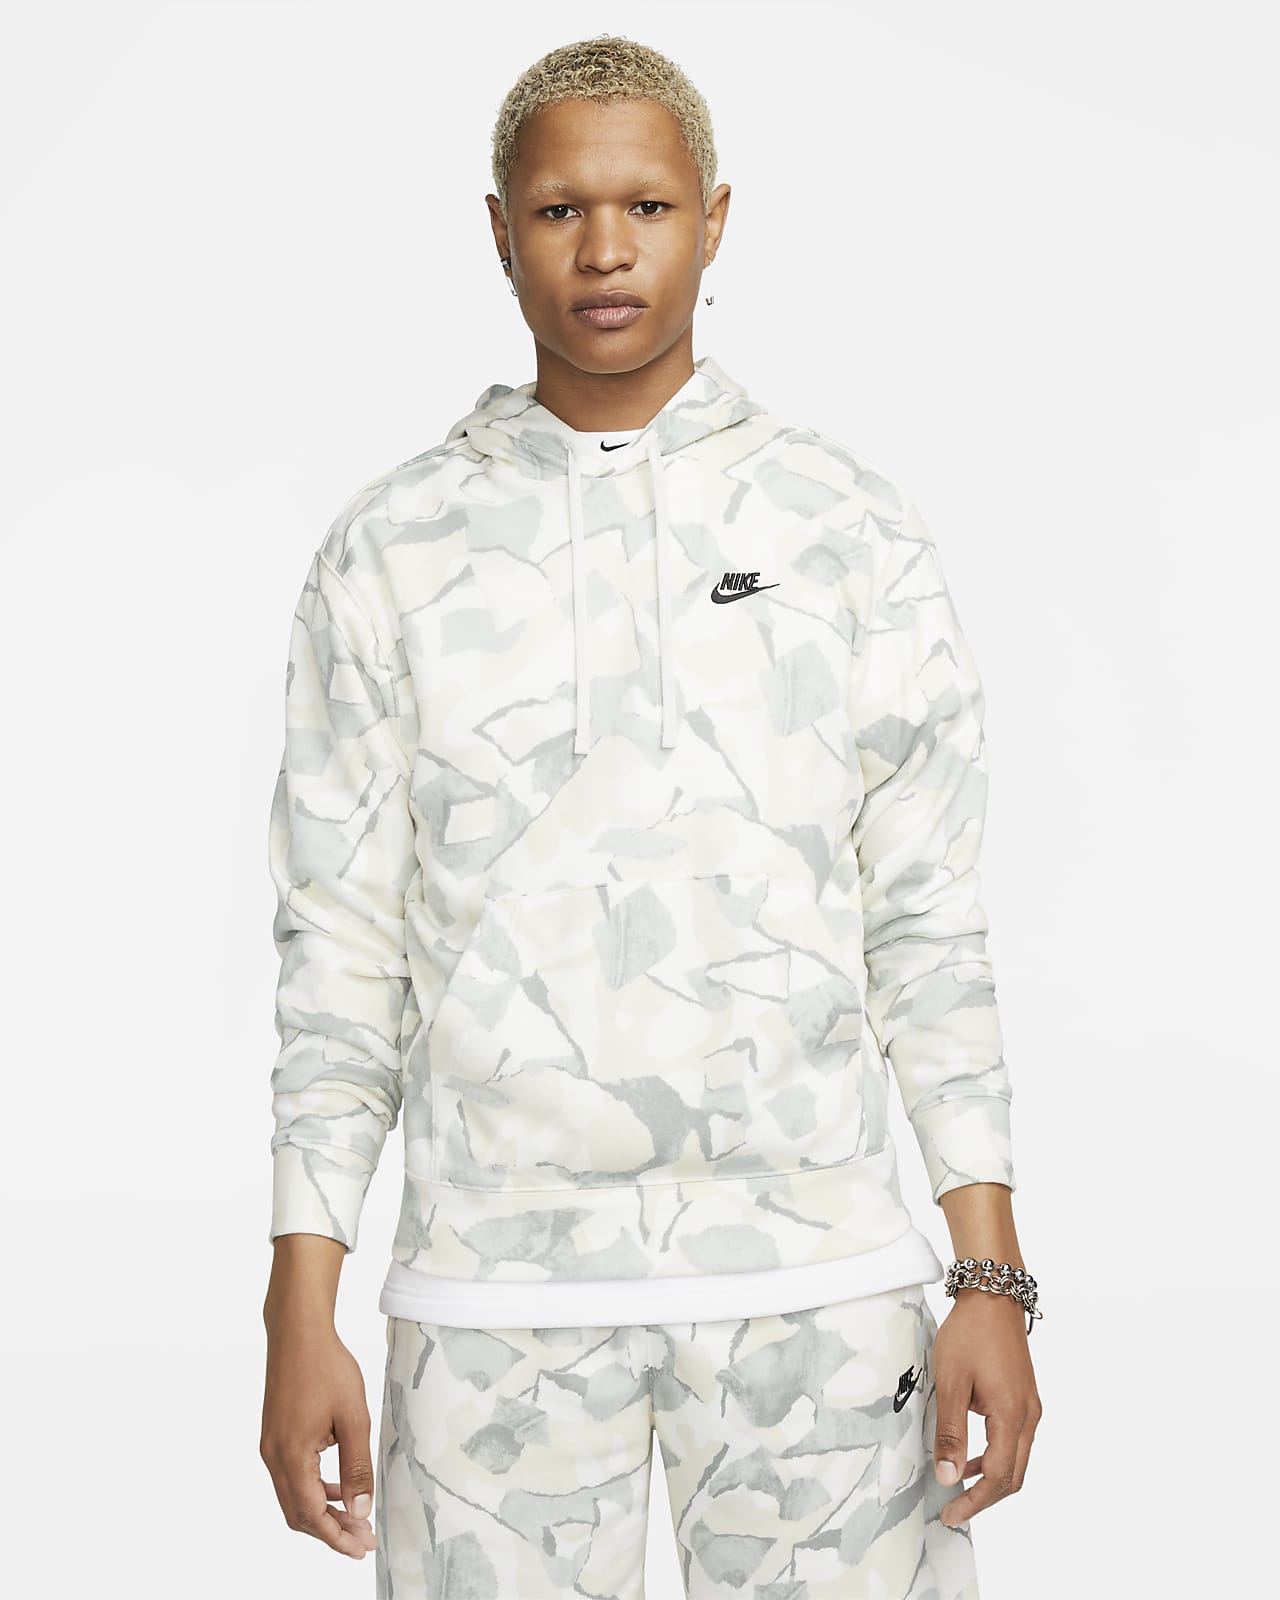 Men's French Terry Pullover Hoodie. Nike LU